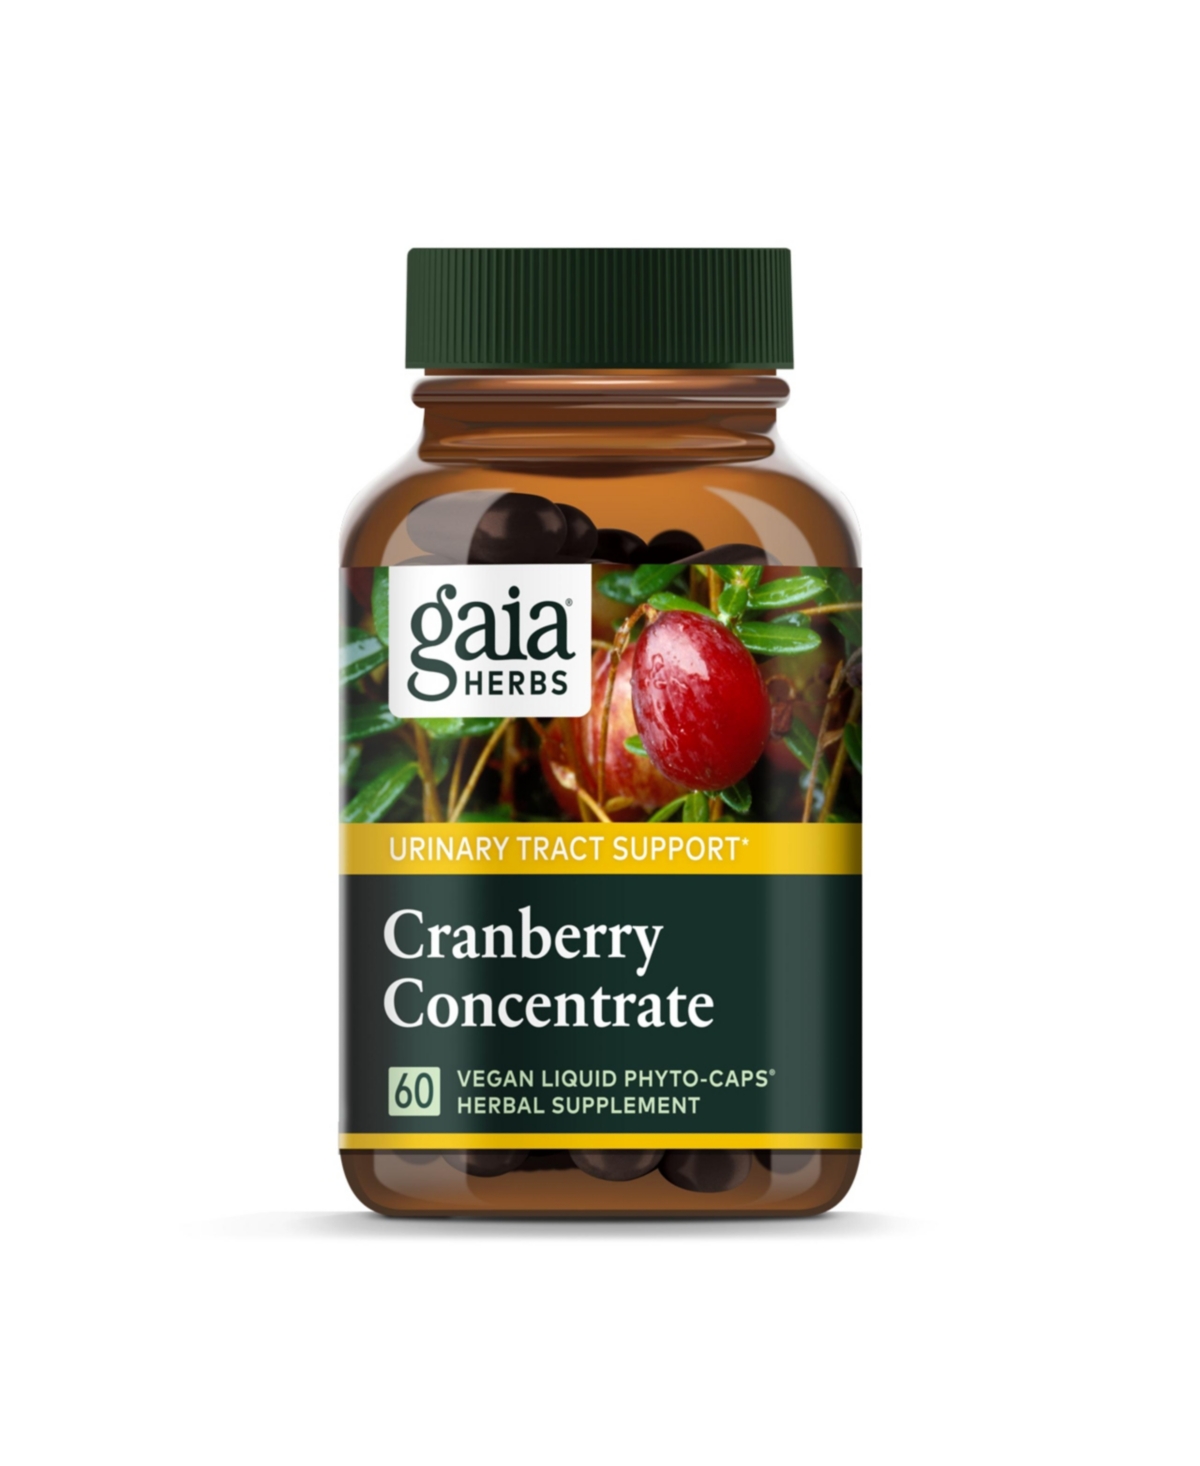 Cranberry Concentrate - Helps Maintain Urinary Tract Health - Made With Organic Cranberry Fruit Juice Extract in Convenient Capsules - 60 L